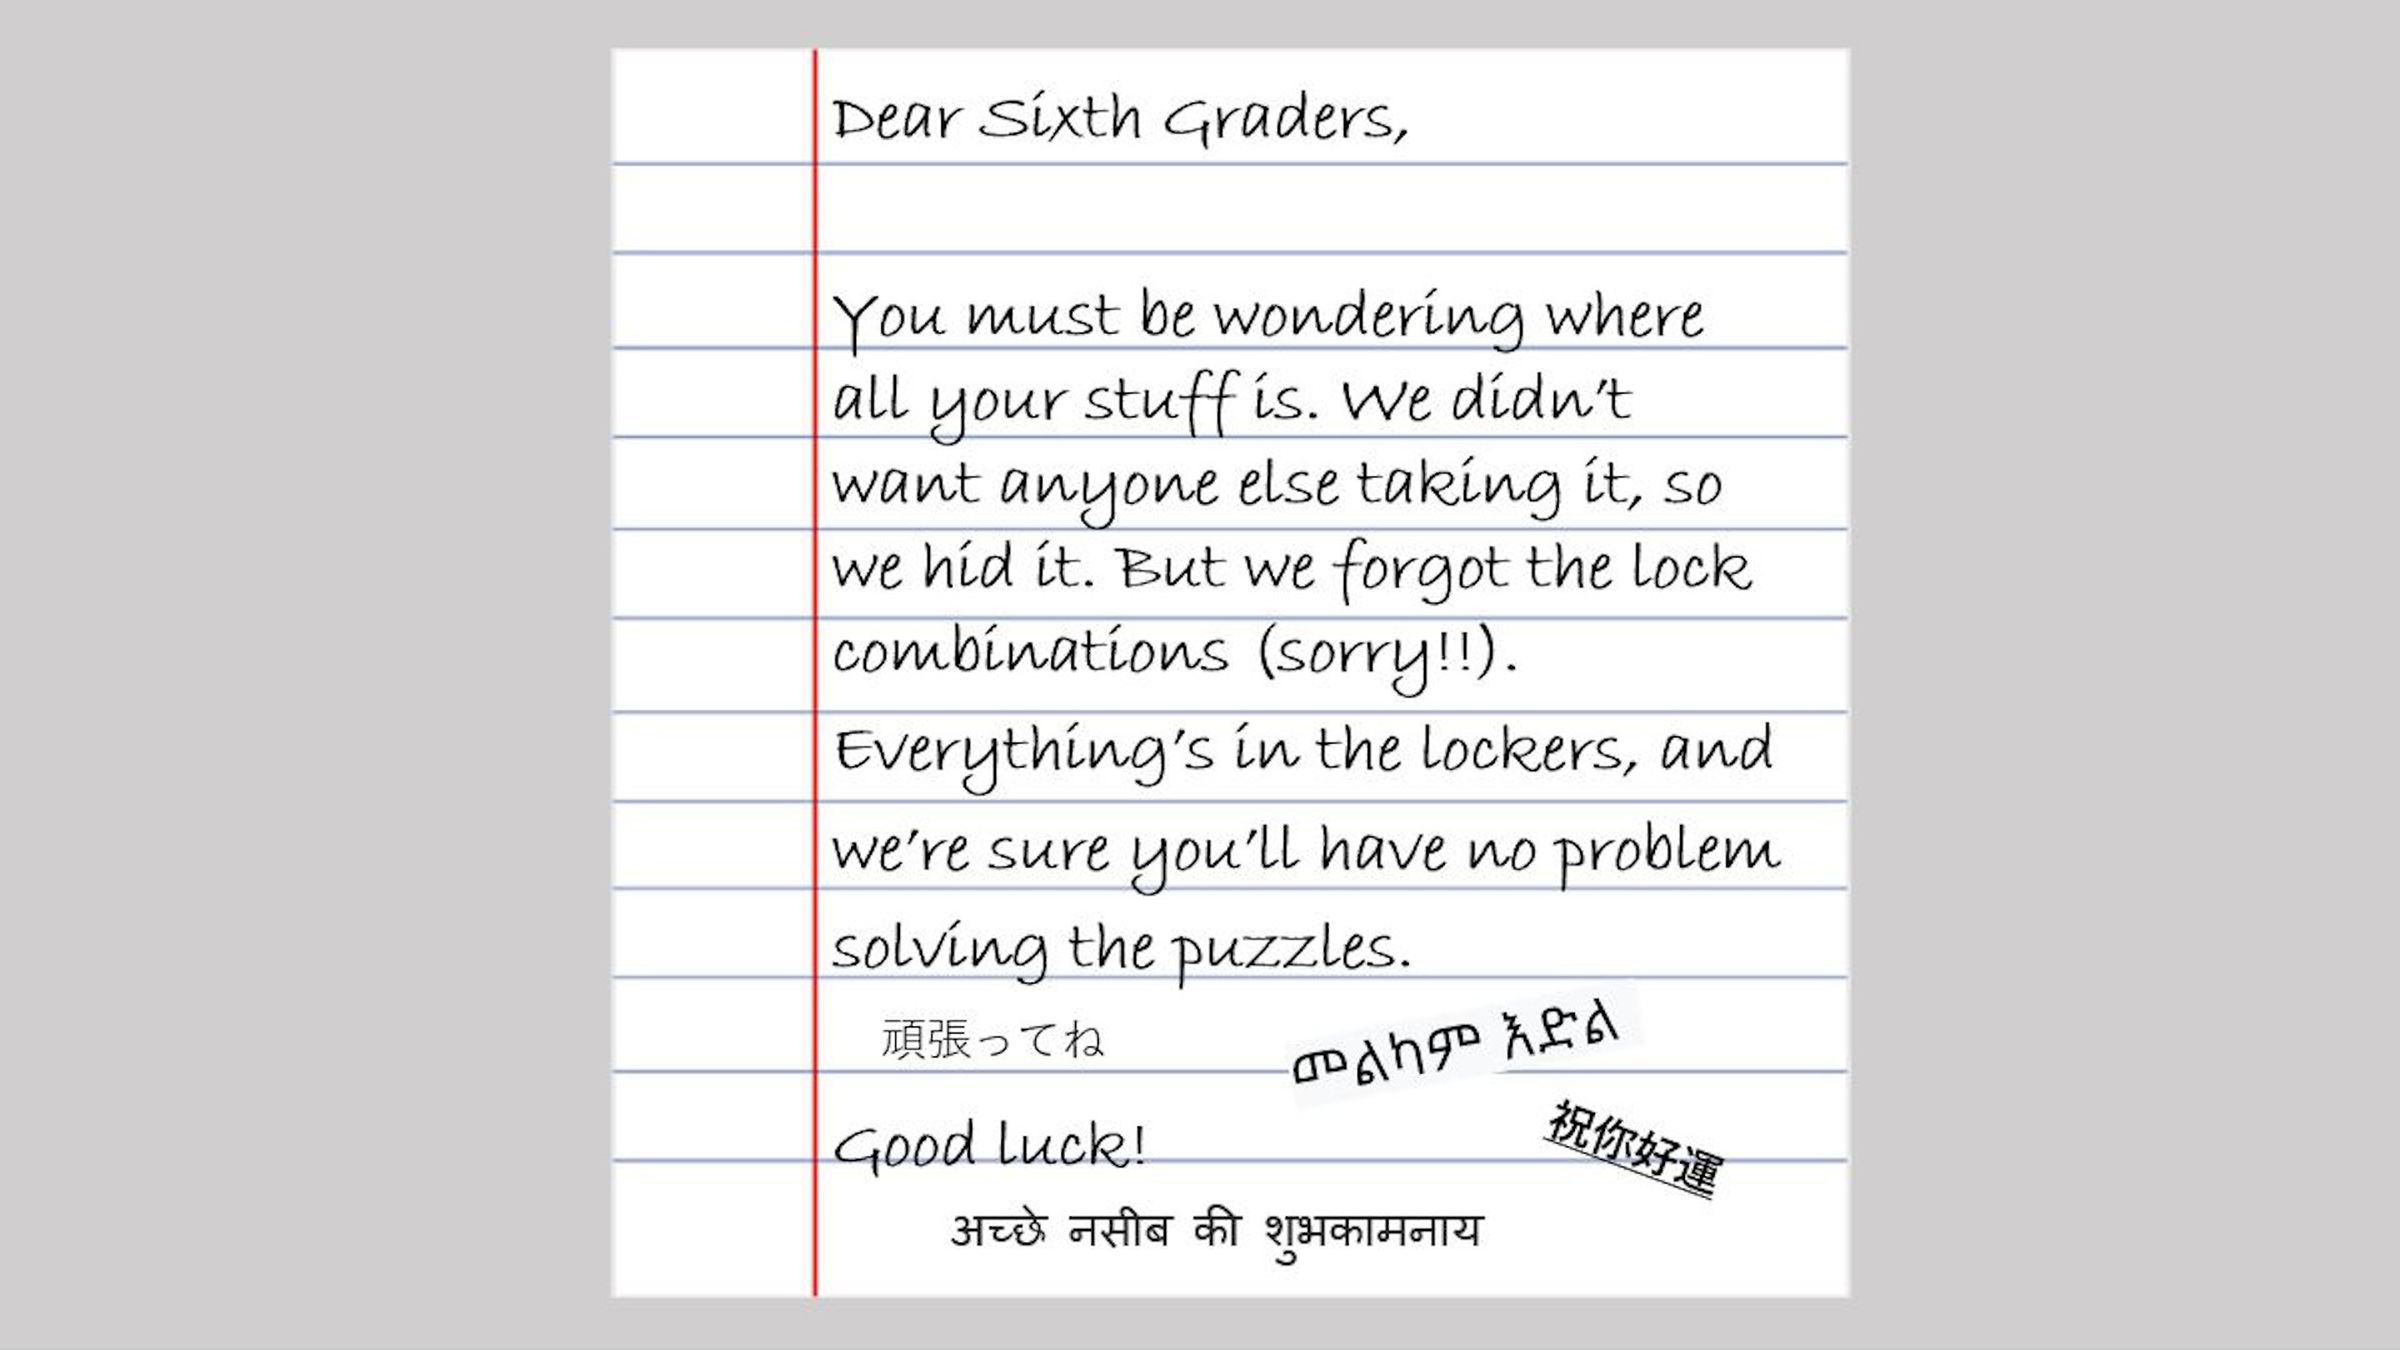 A handwritten note on a piece of lined paper reads: “Dear Sixth Graders, You must be wondering where all your stuff is. We didn’t want anyone else taking it, so we hid it. But we forgot the lock combinations, sorry. Everything’s in the lockers, and we’re sure you’ll have no problem solving the puzzles. Good luck!” At the bottom are four signatures.